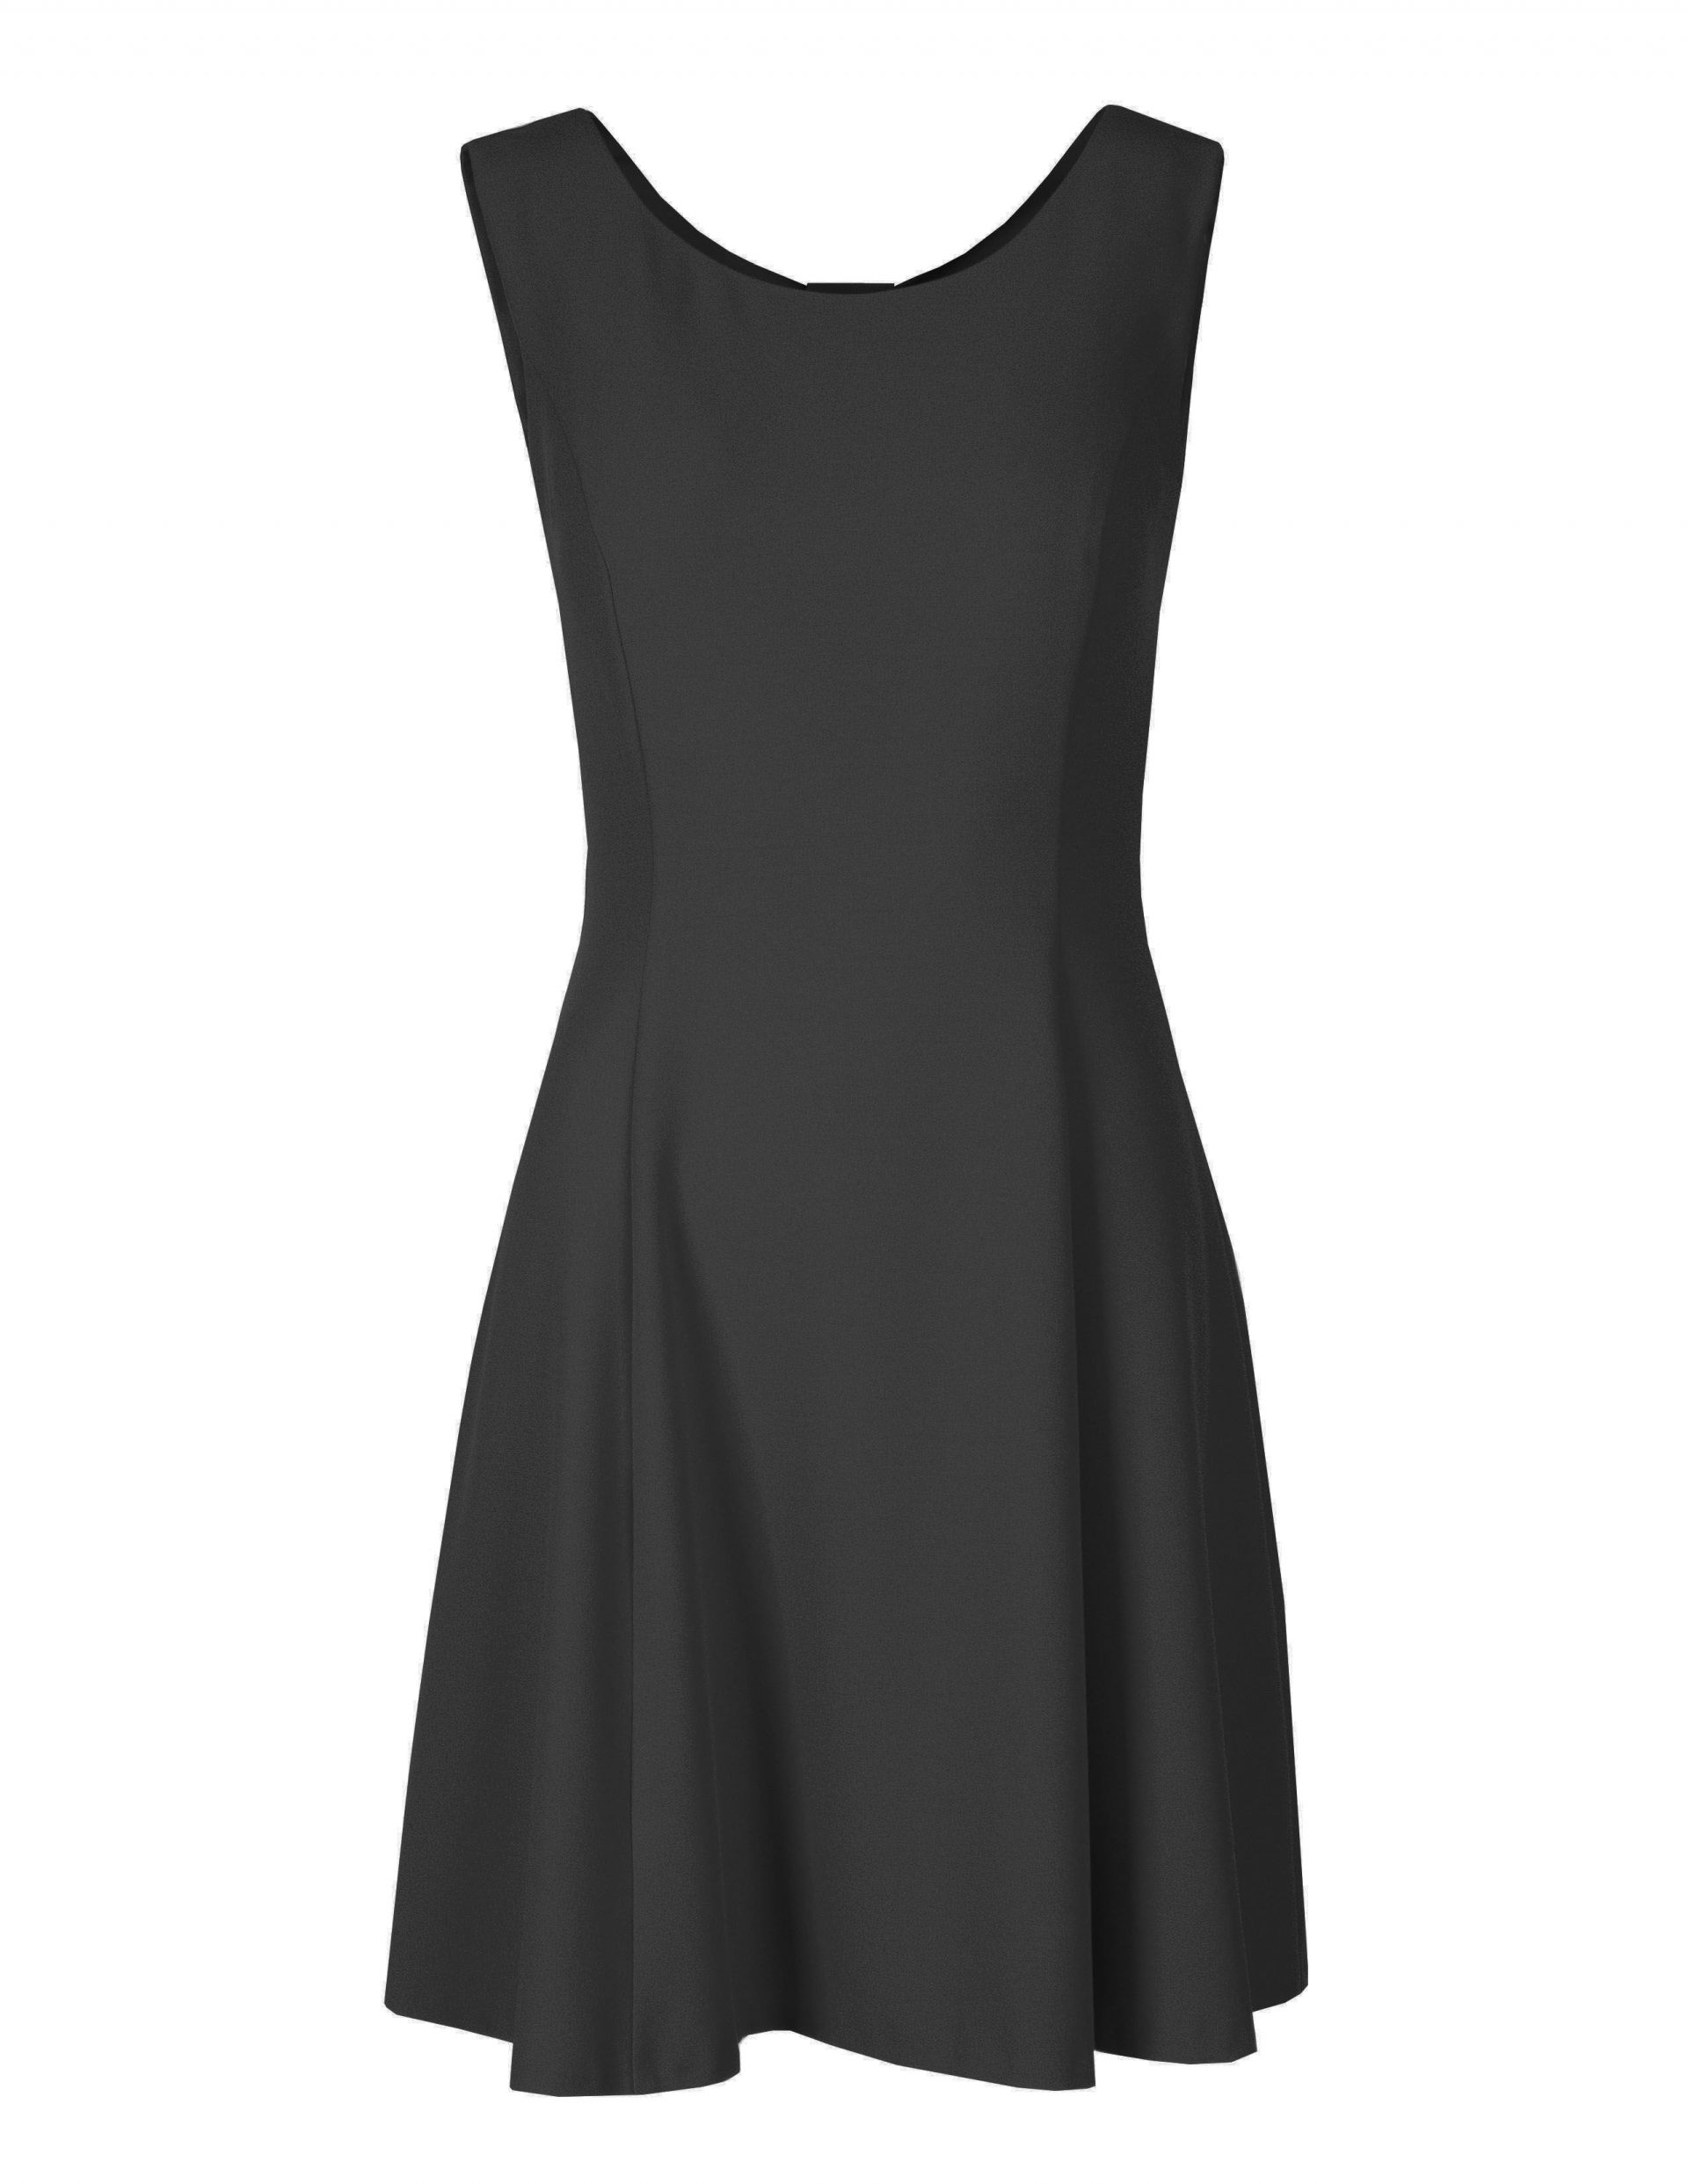 Sleeveless dress with round neck and bow on the backside 0